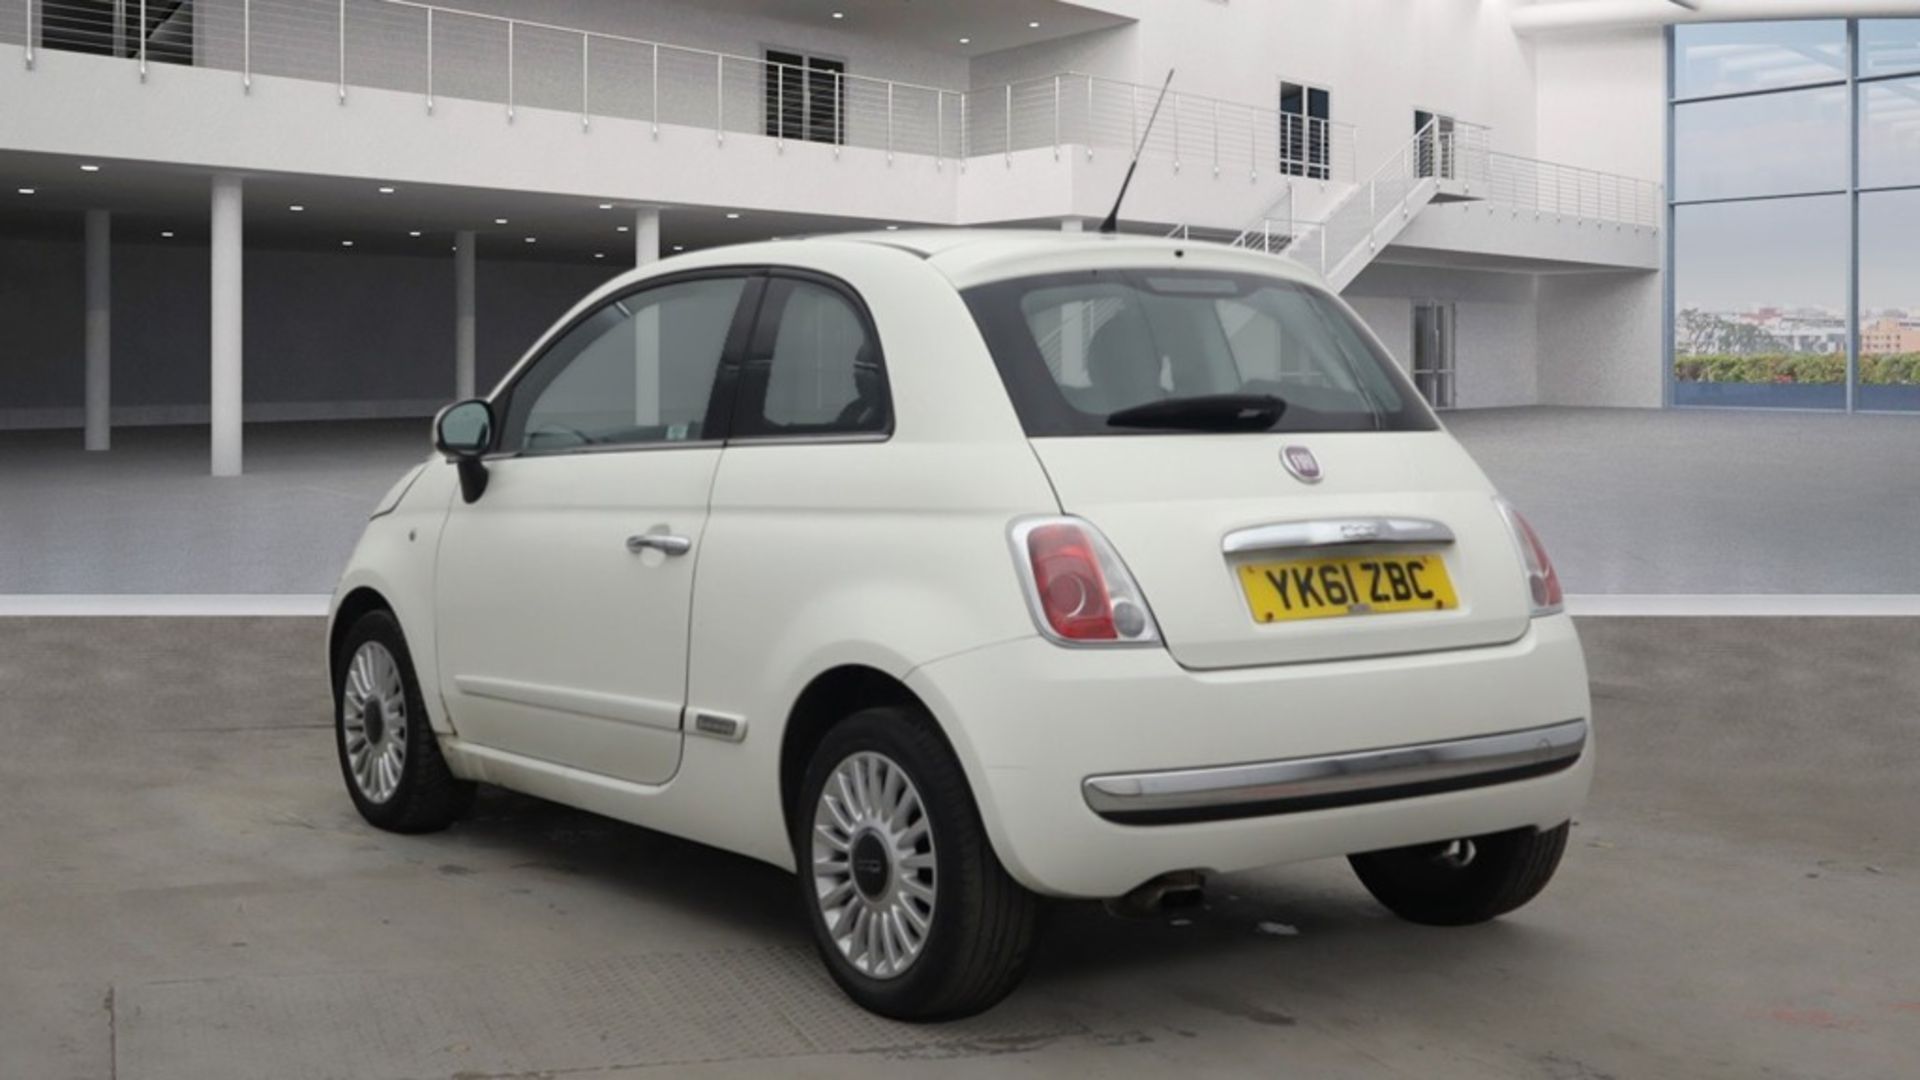 ** ON SALE ** Fiat 500 Lounge 1.3 2011 '61 Reg' A/C - Panoramic Roof - Only 89,590 Miles - No Vat - Image 4 of 9